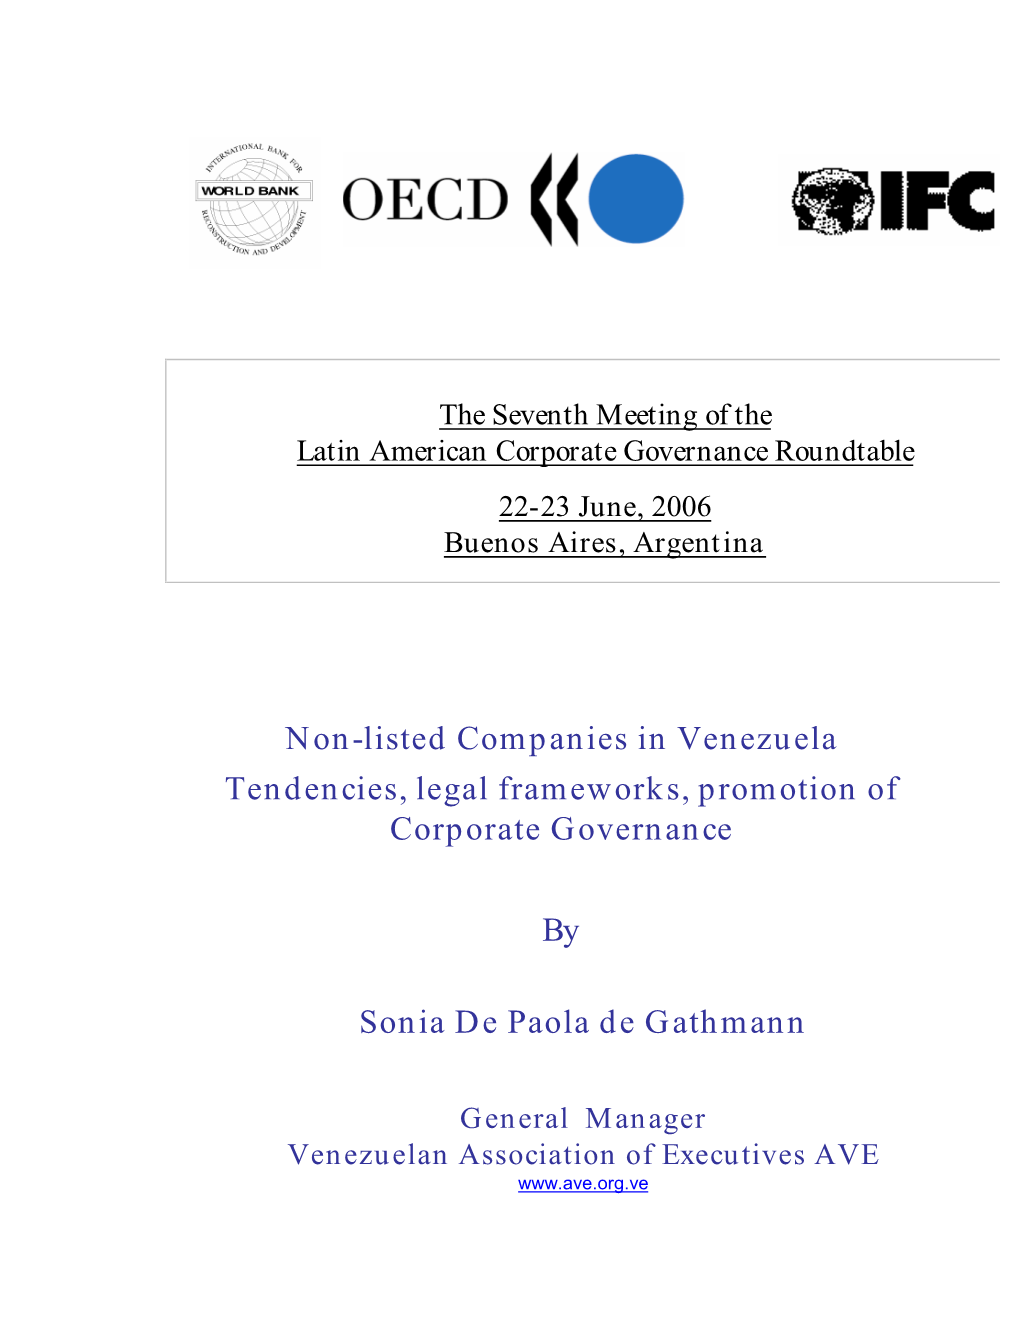 Non-Listed Companies in Venezuela Tendencies, Legal Frameworks, Promotion of Corporate Governance